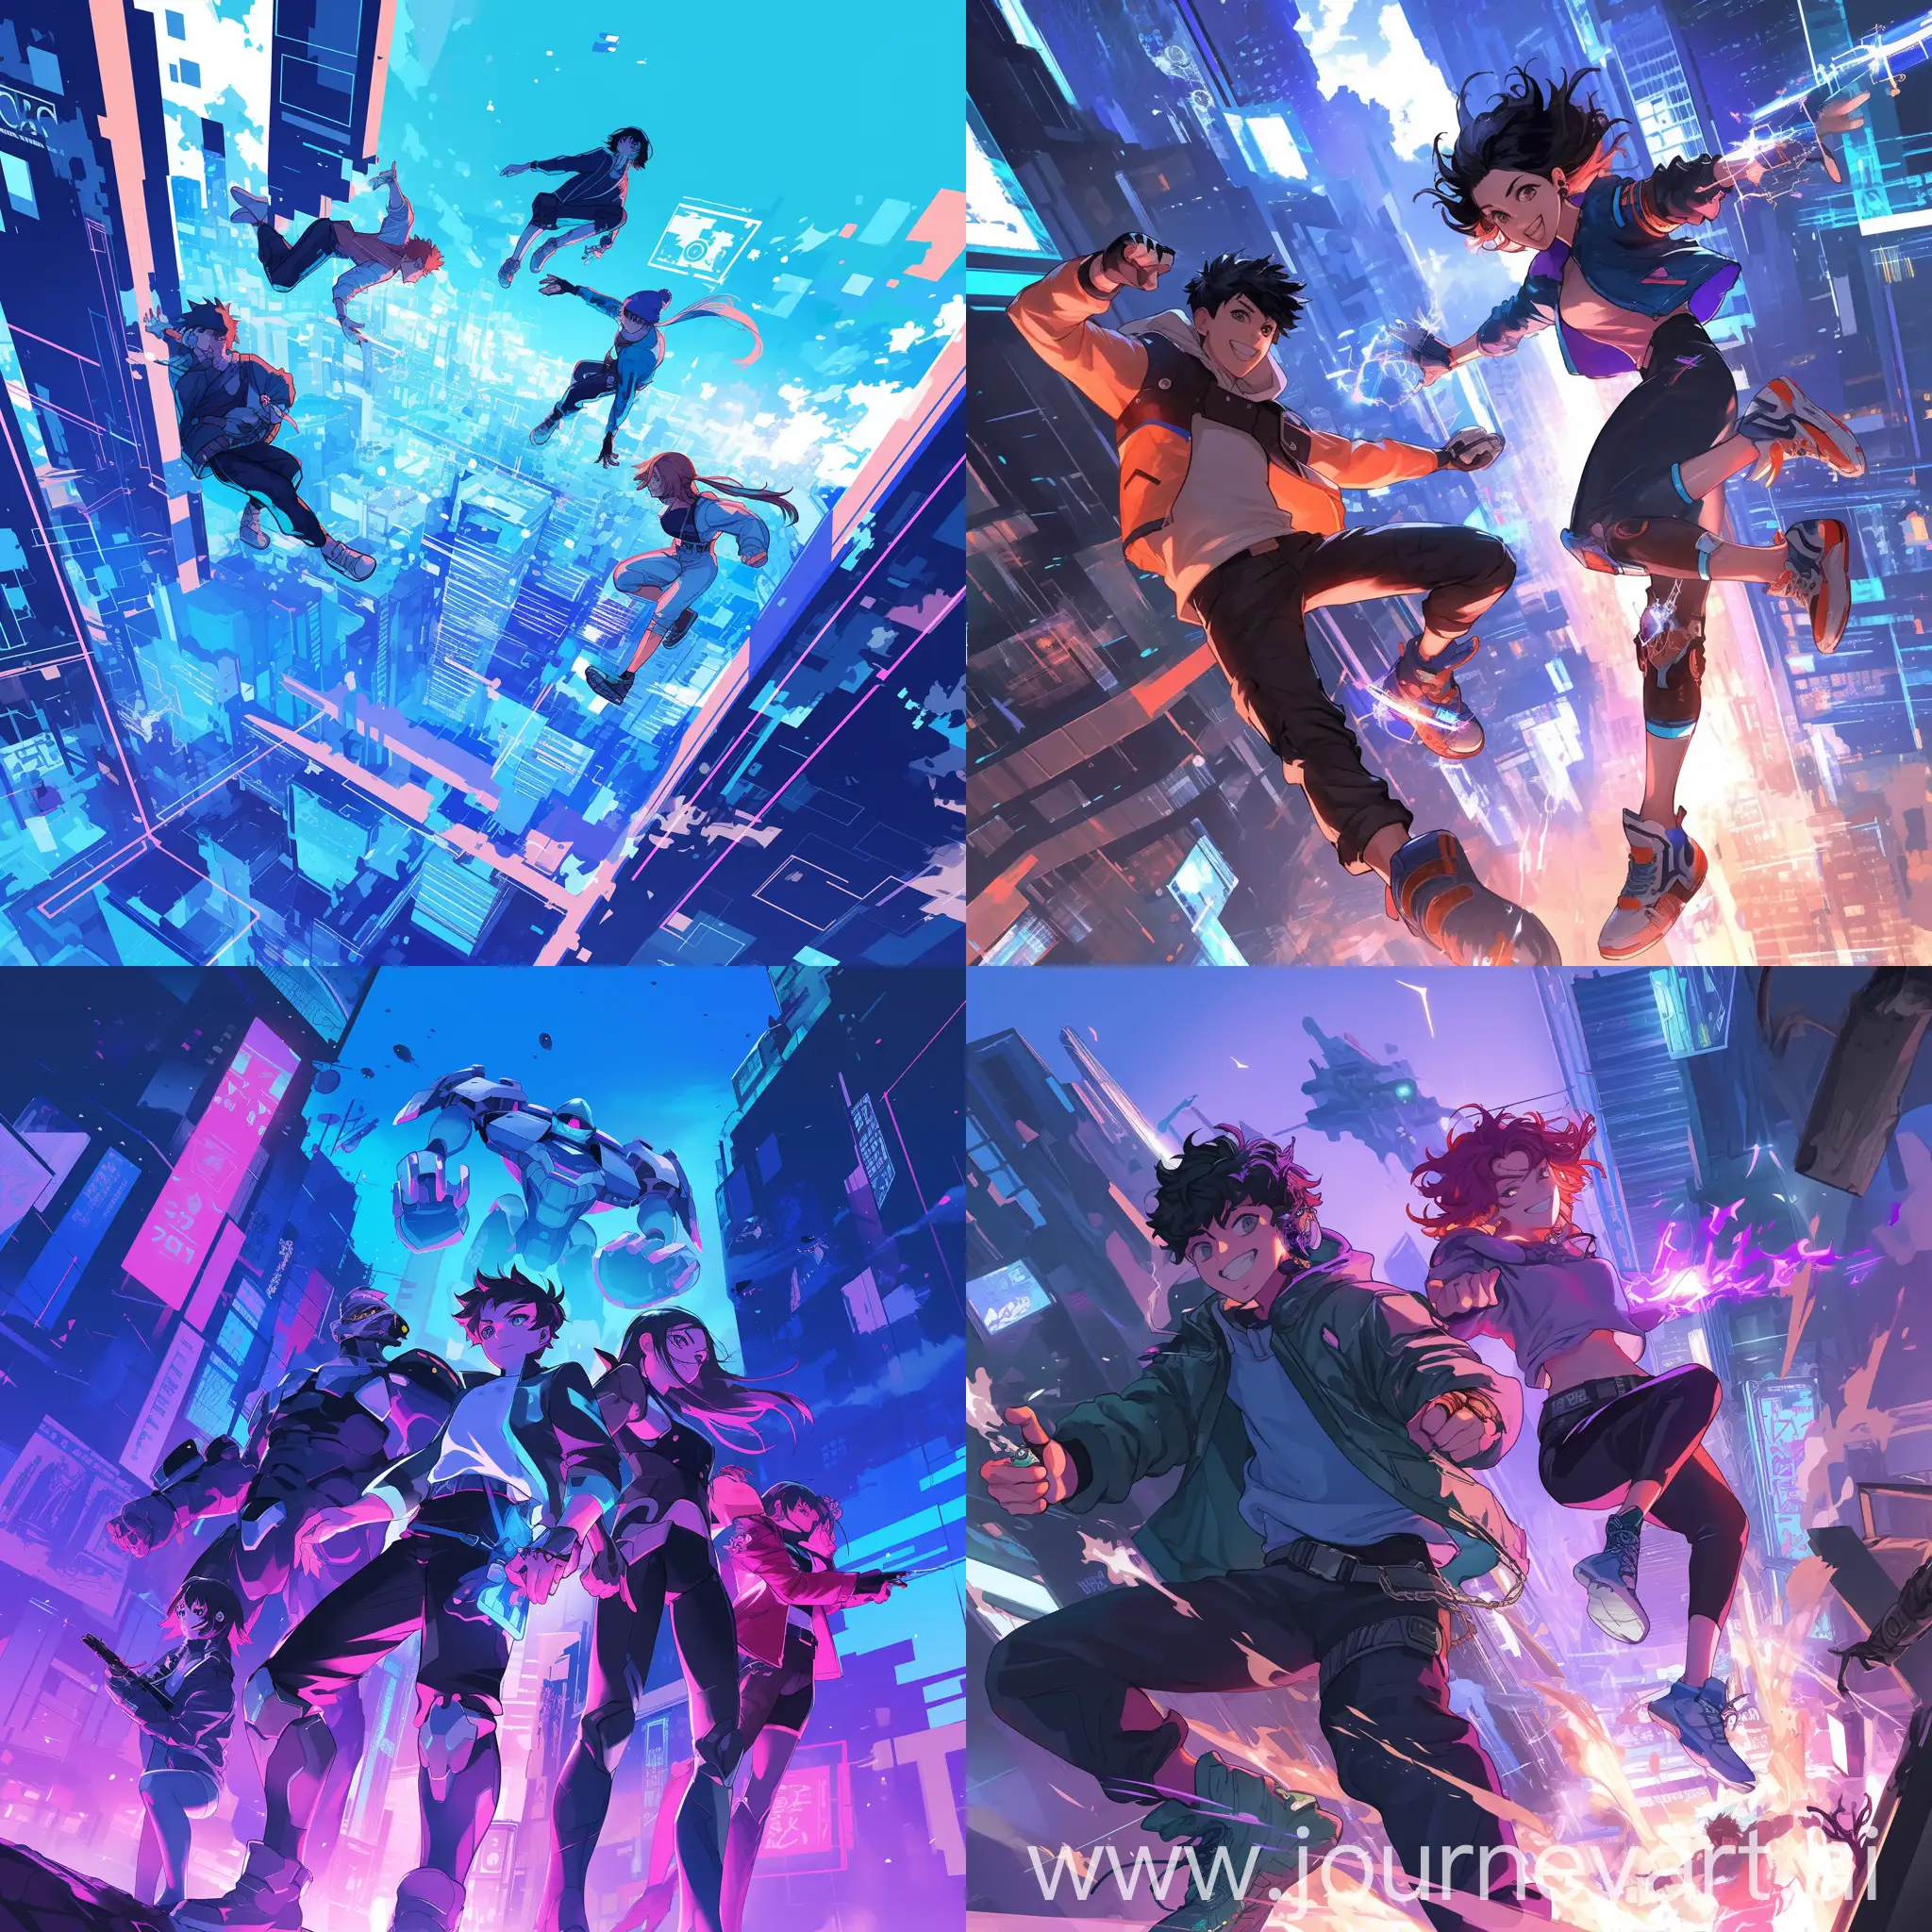 Dynamic-Manga-Cover-Featuring-Teenage-Heroes-in-Futuristic-Cityscapes-and-Vibrant-Action-Scenes